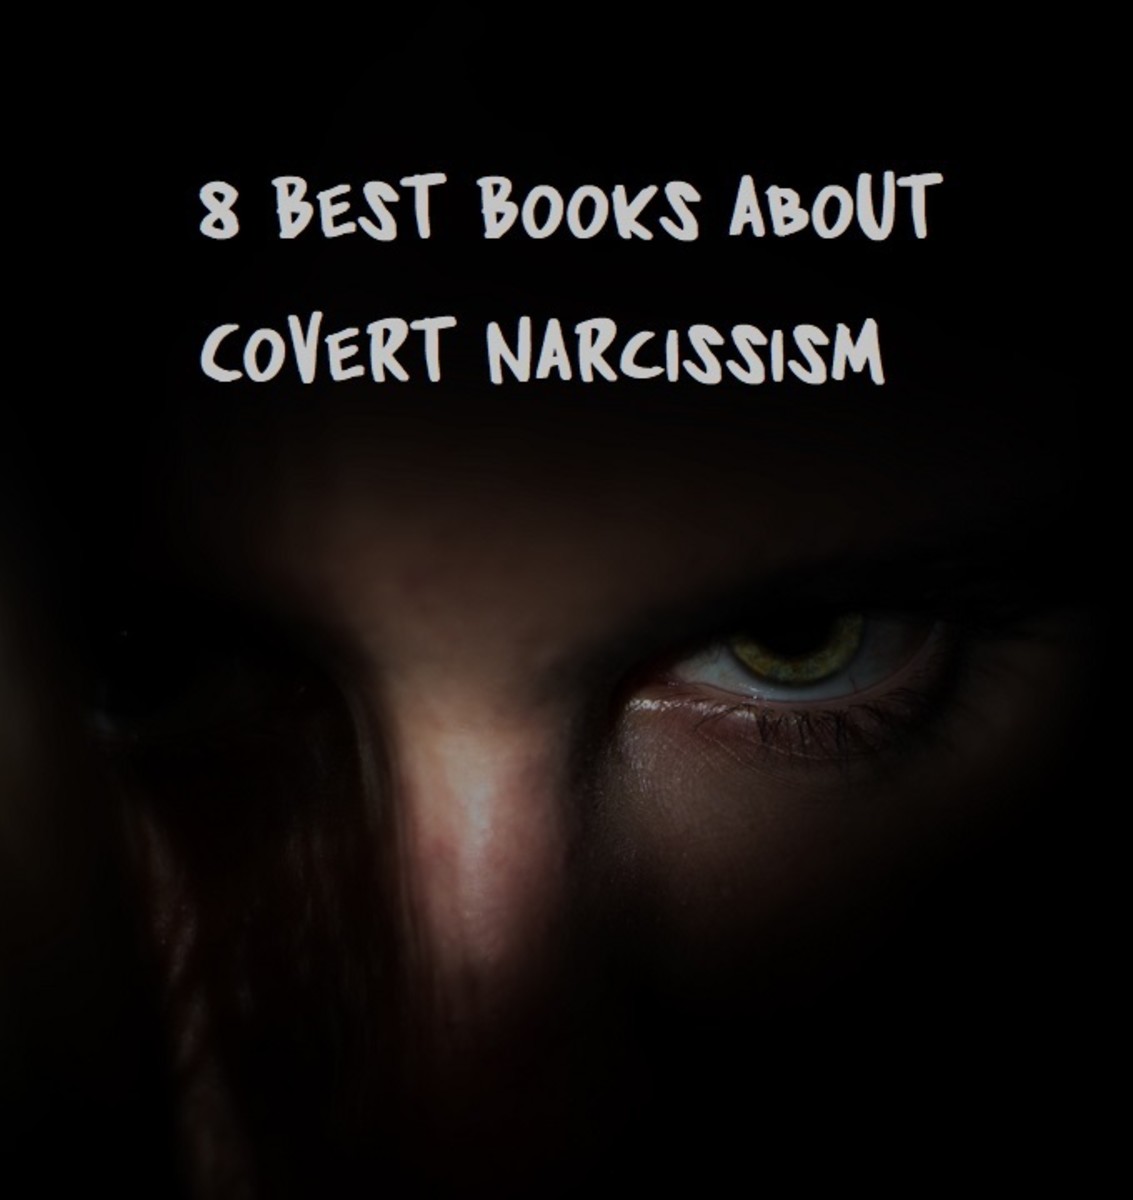 8-best-books-about-covert-narcissism